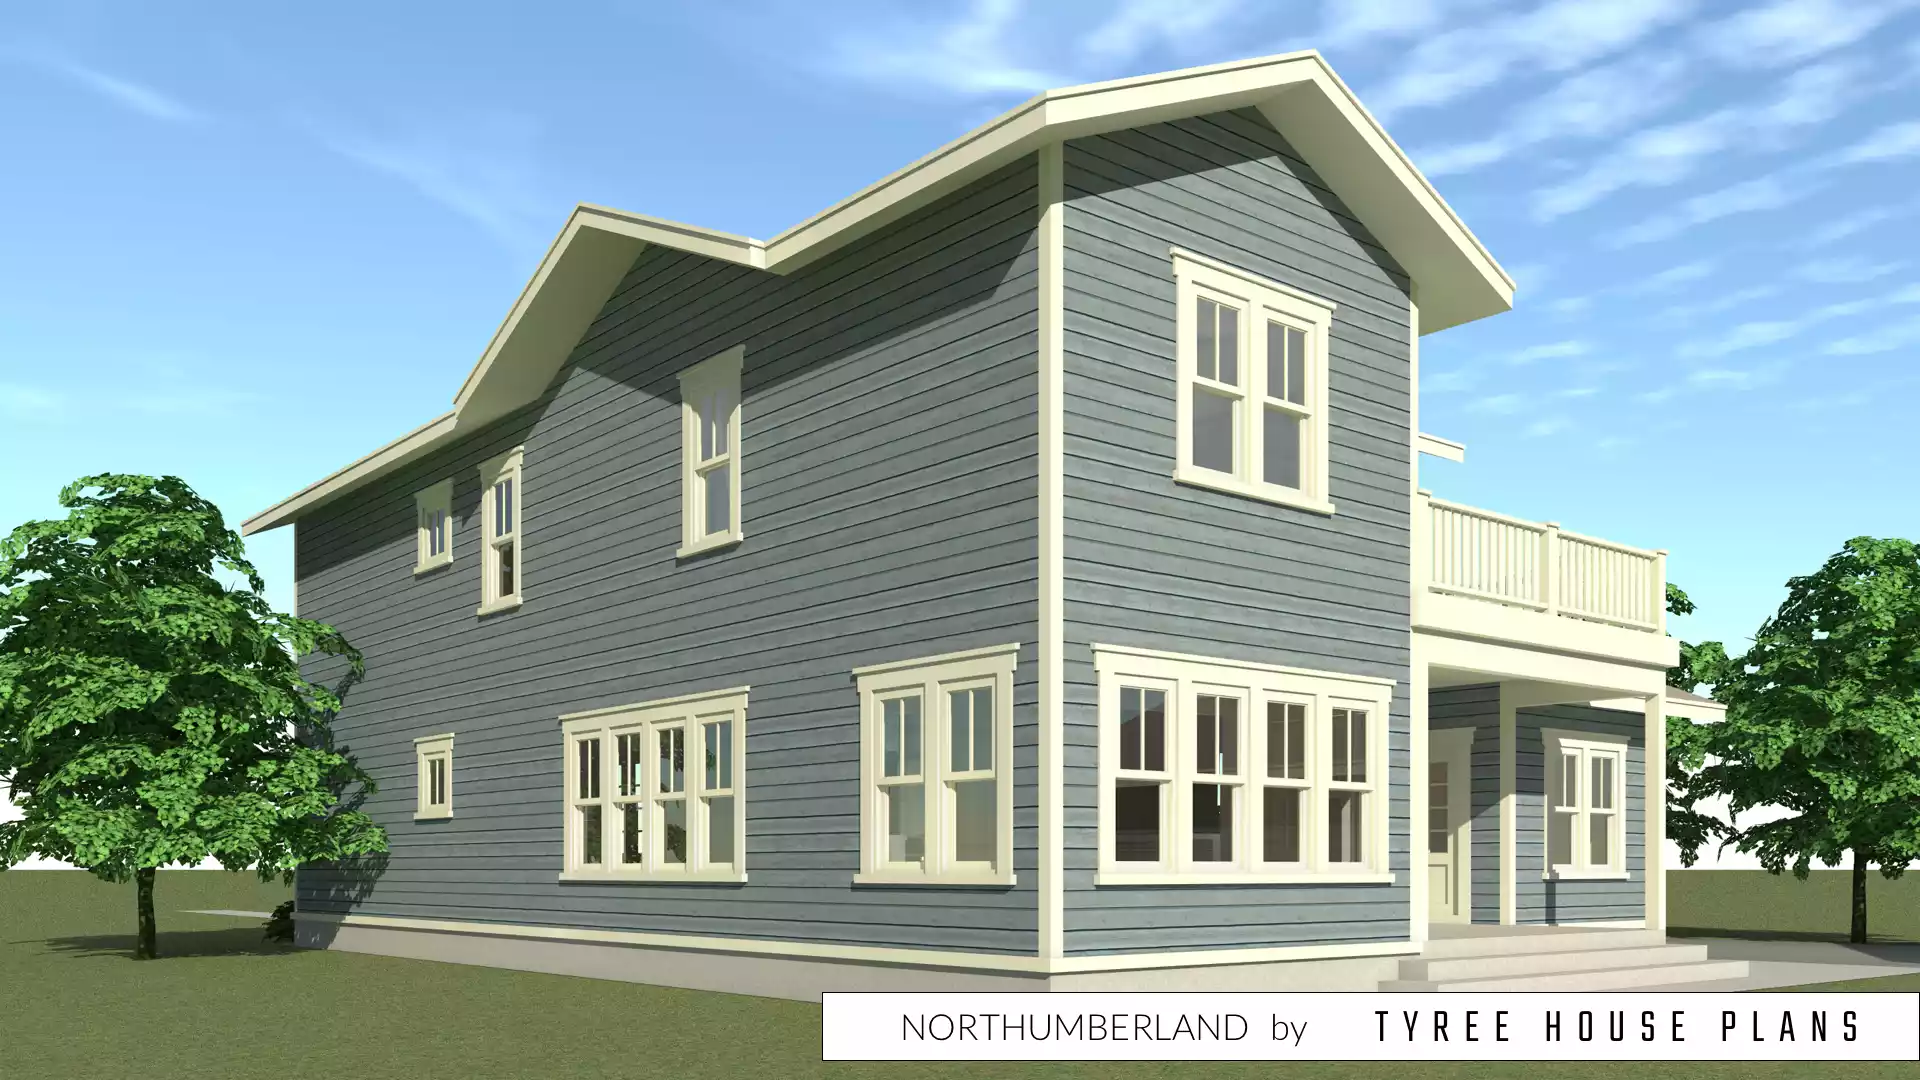 Rear view. Northumberland by Tyree House Plans.